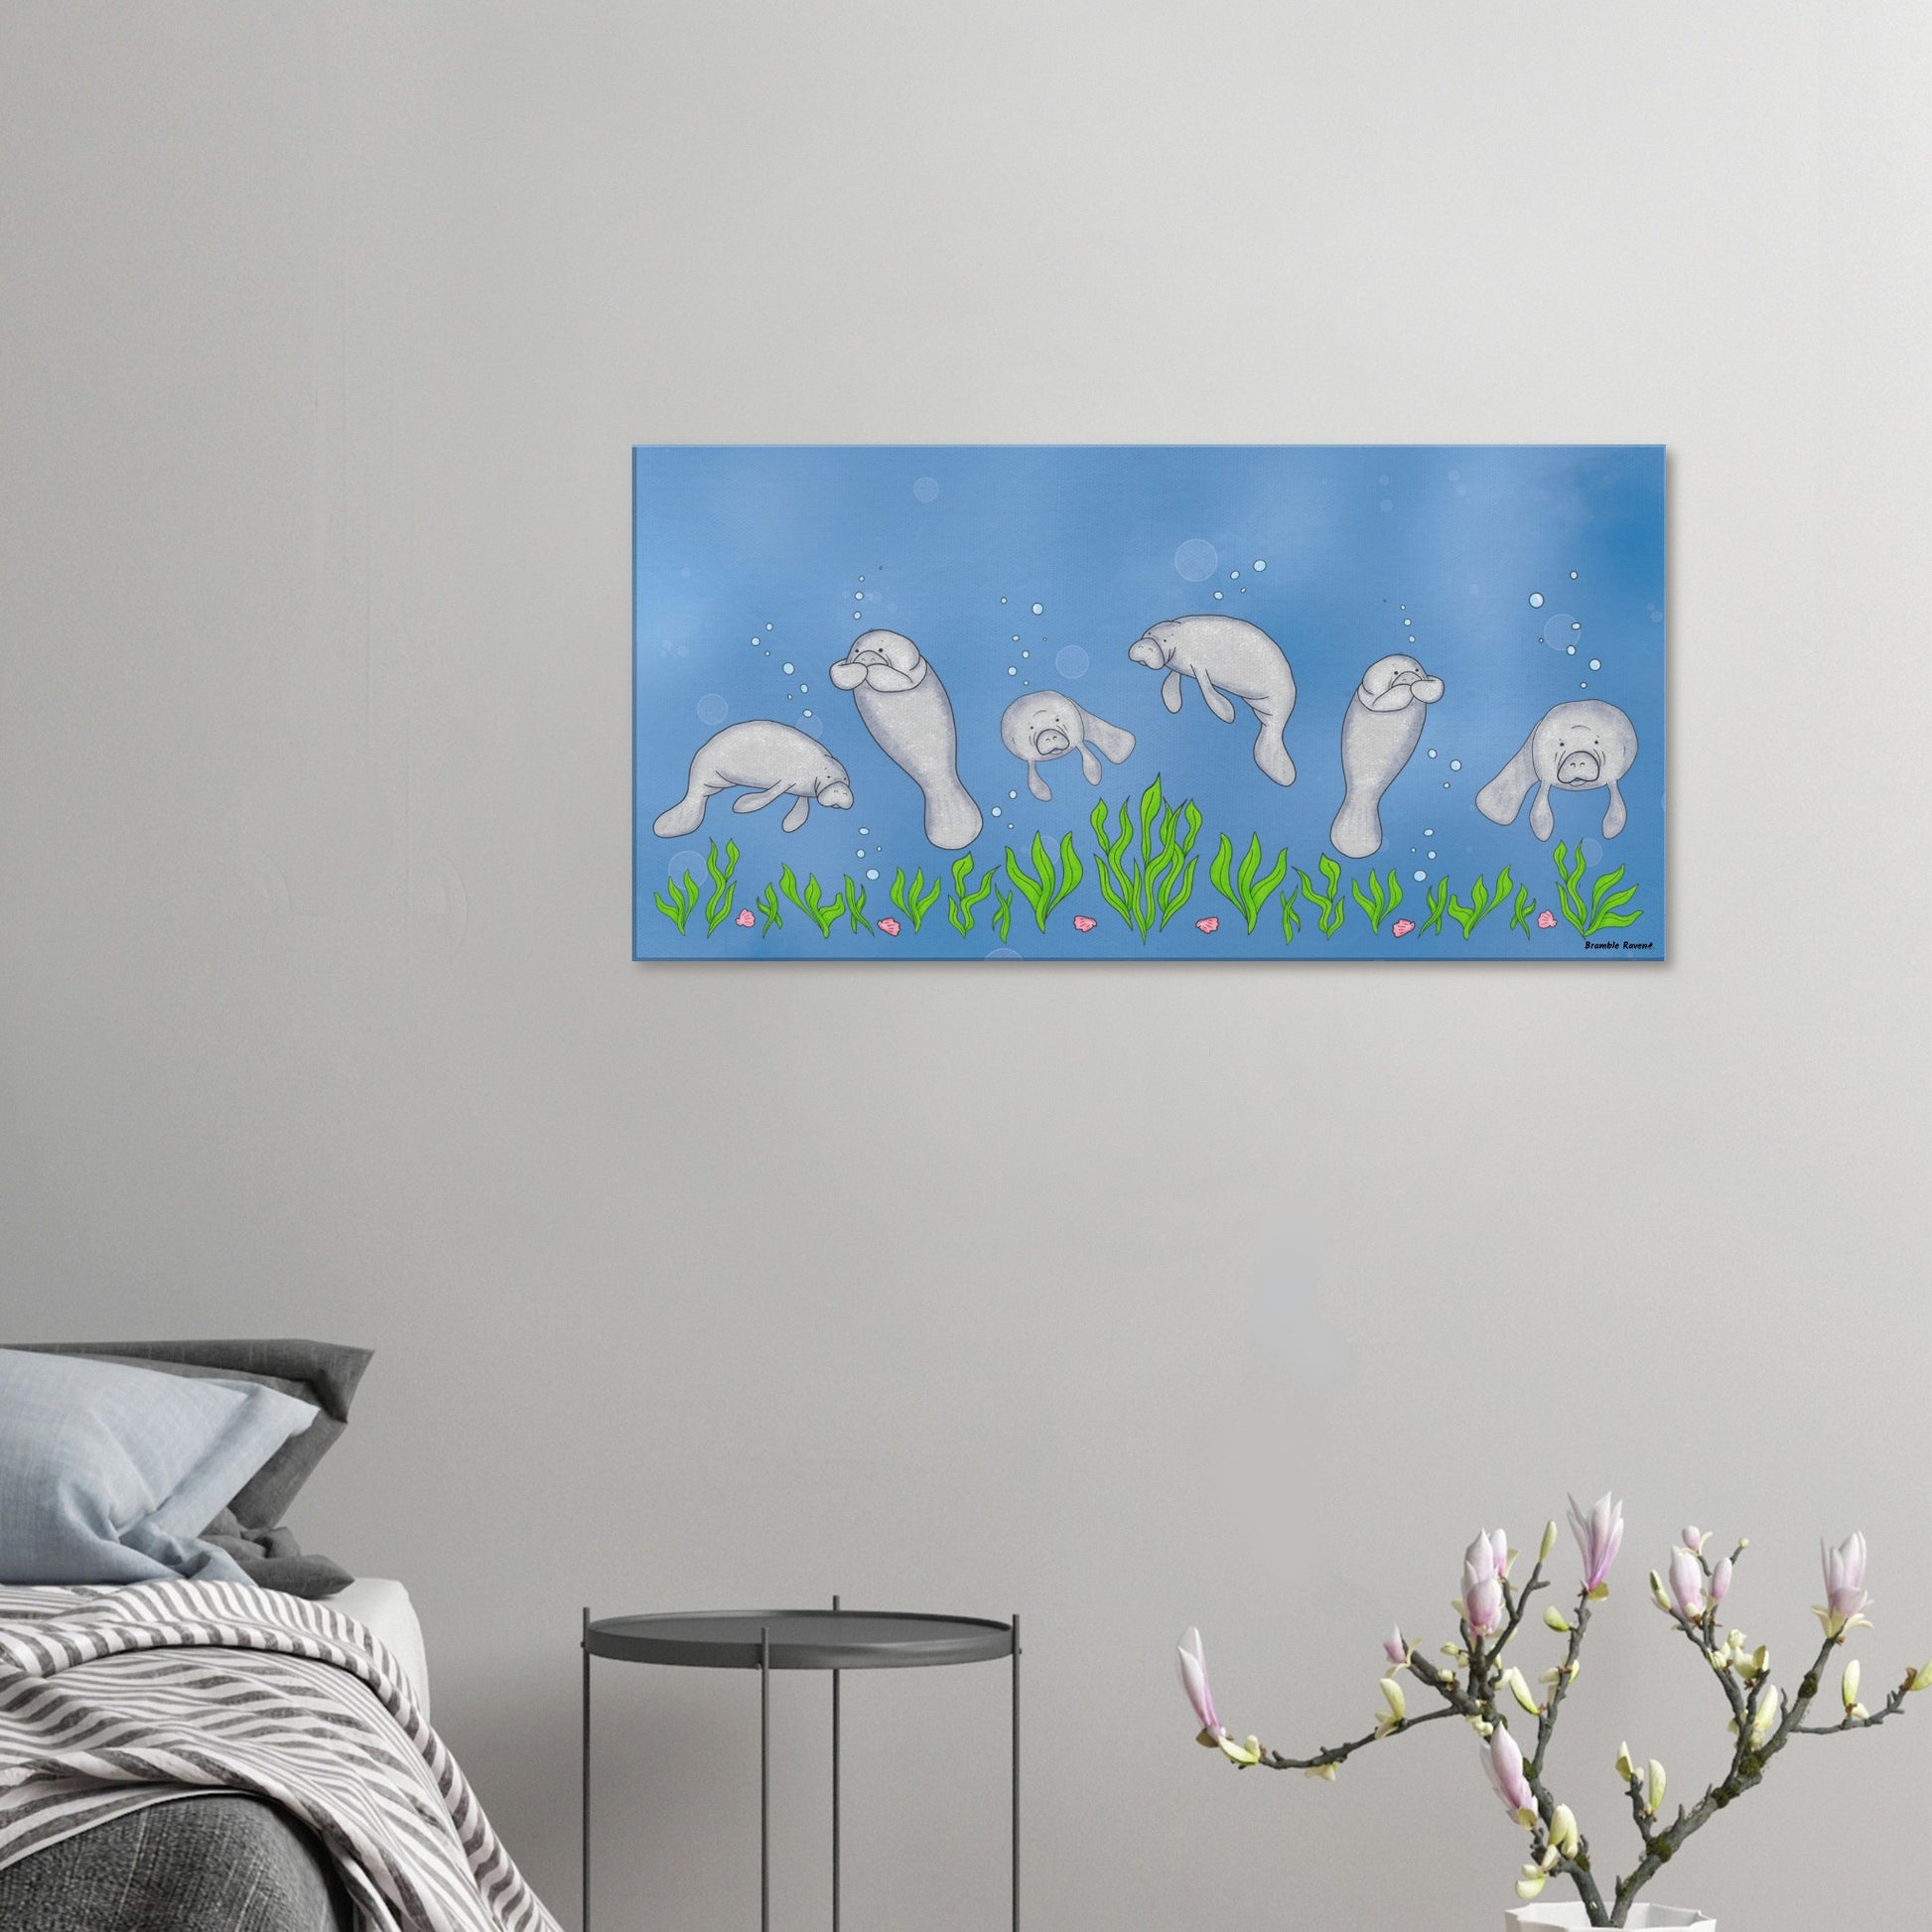 20 by 40 inch slim canvas wall art print featuring cute illustrated manatees swimming above the seabed. Shown on wall in bedroom above grey bed, grey nightstand, and blossoming plant decor.